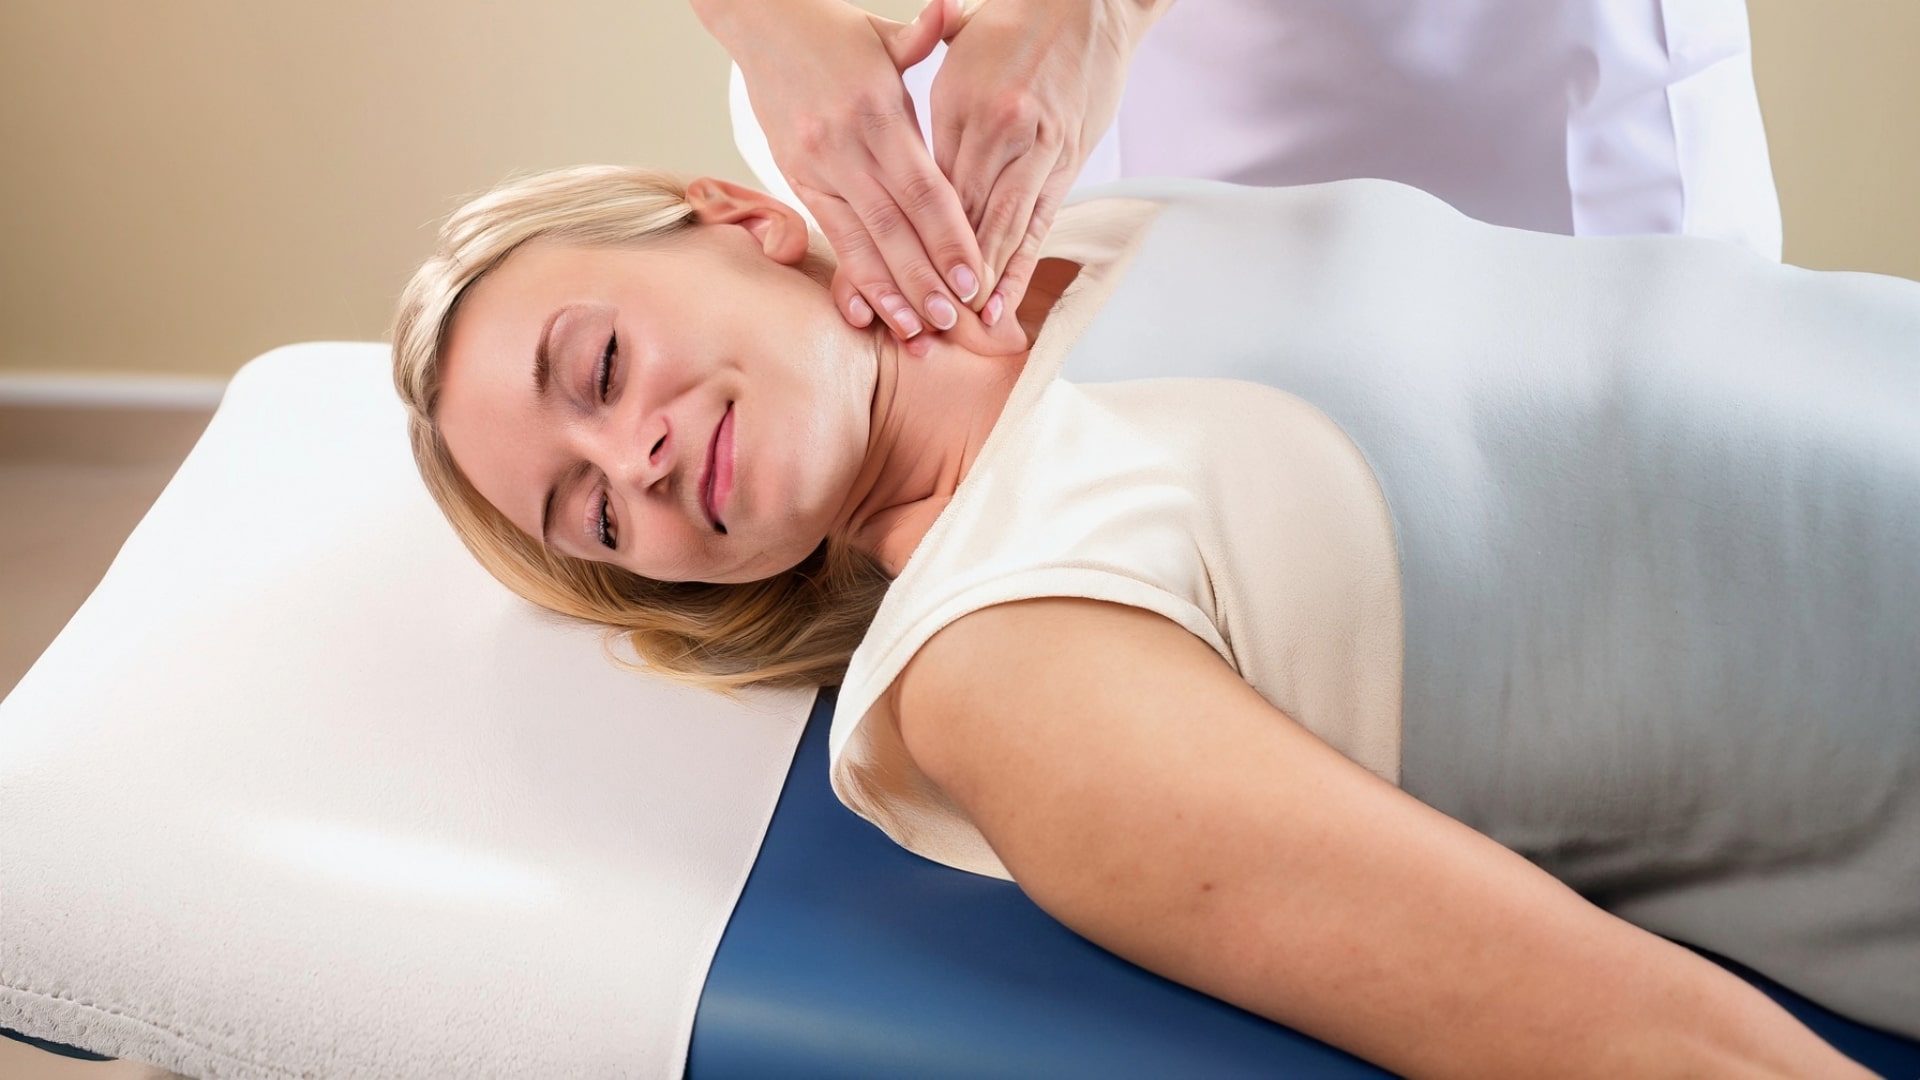 A woman receives a neck massage from a trained osteopath in Hamburg.